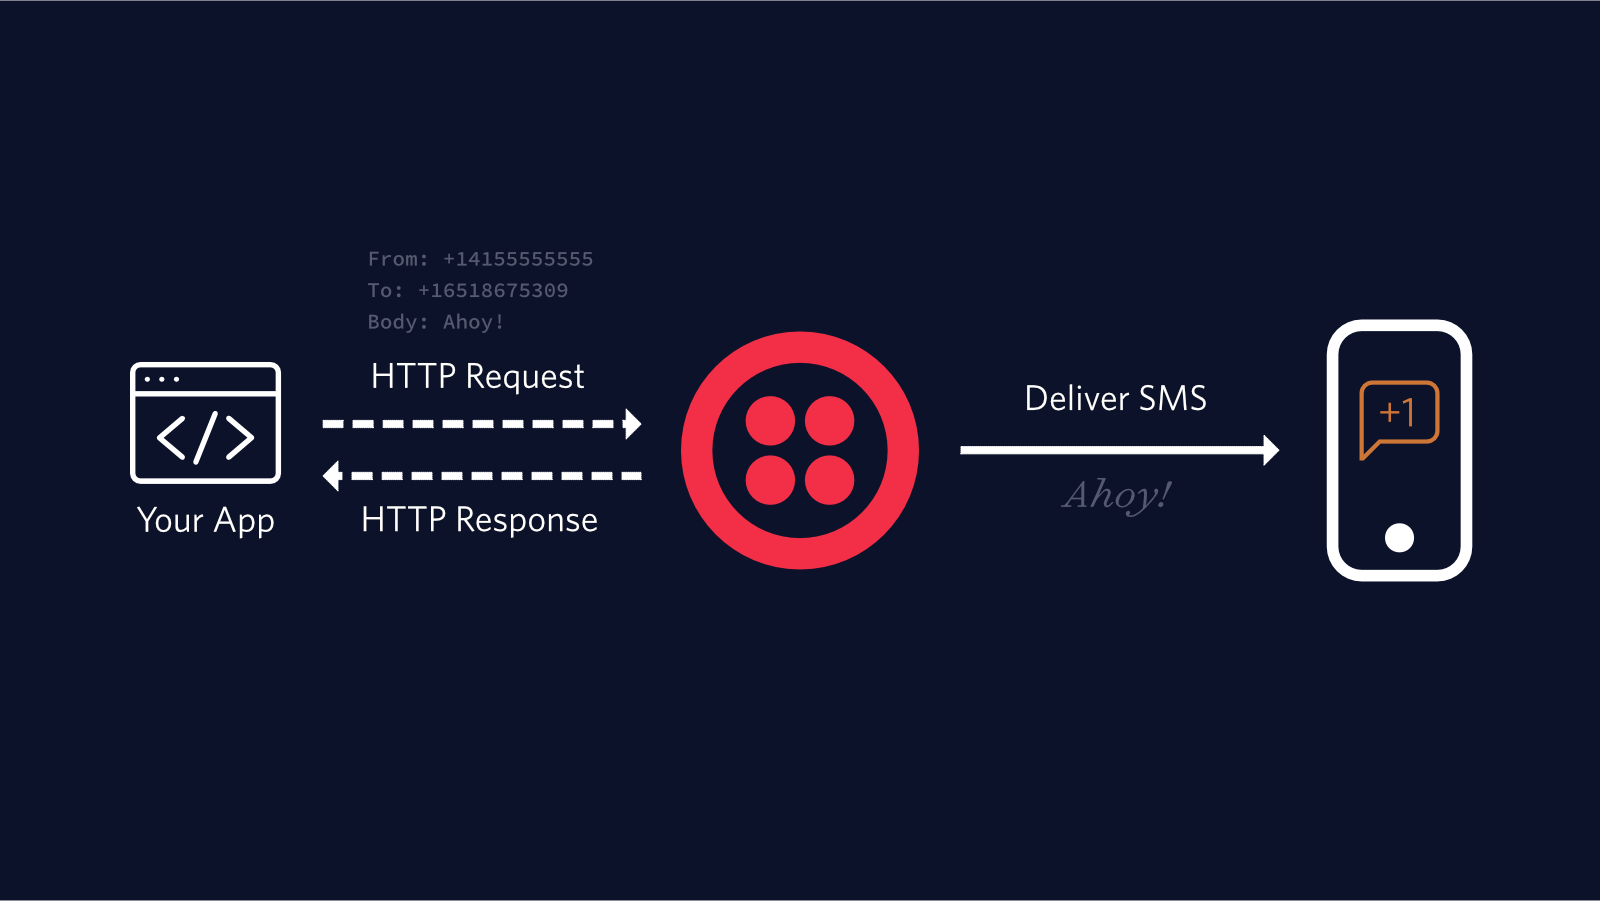 SMS Notifications are Easy with Twilio.